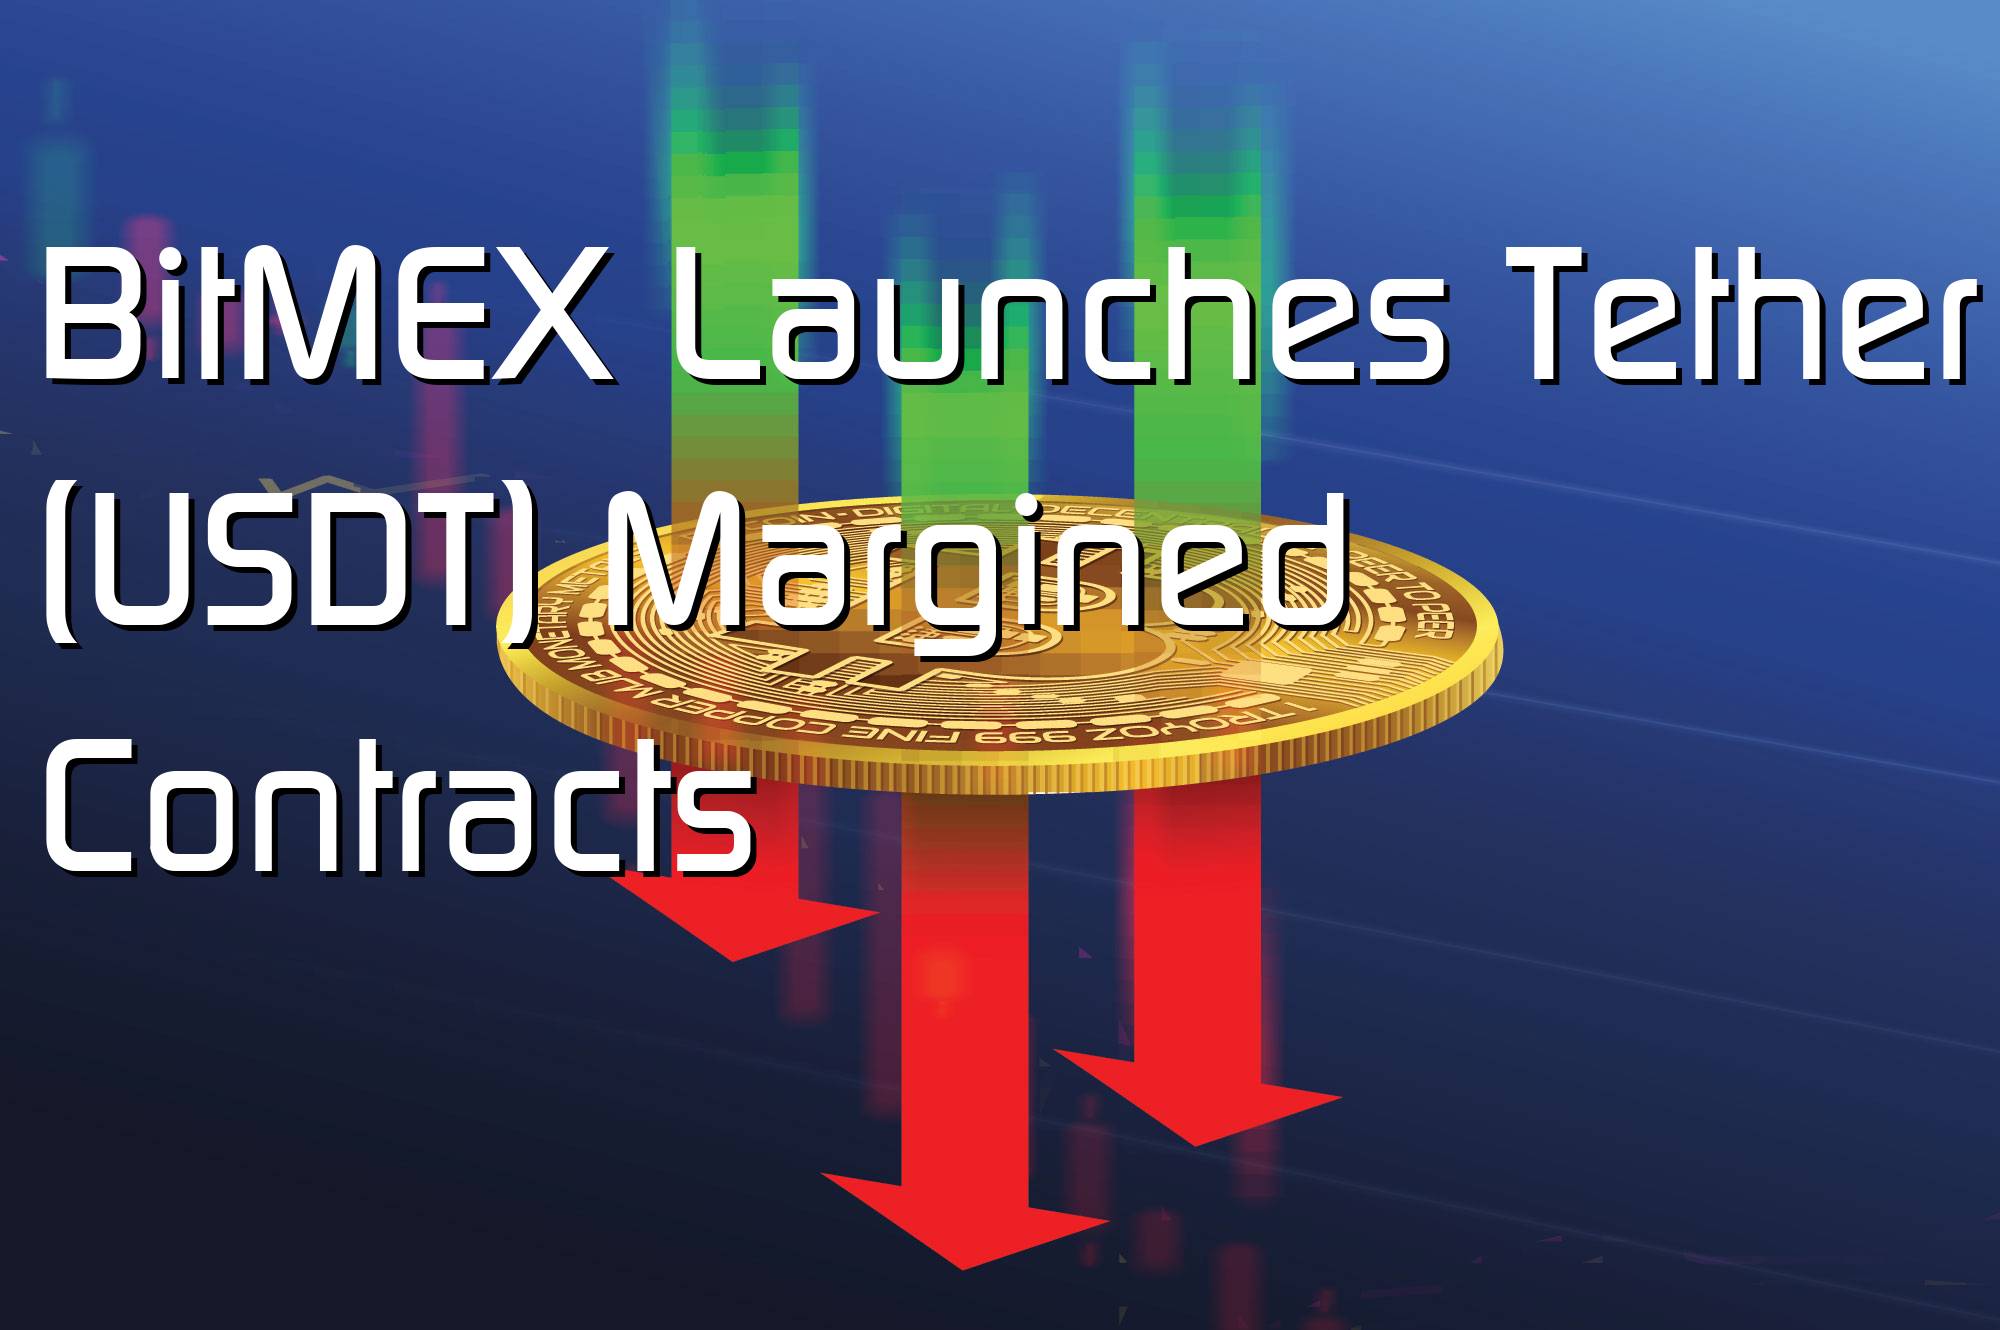 @$66712: BitMEX Launches Tether (USDT) Margined Contracts